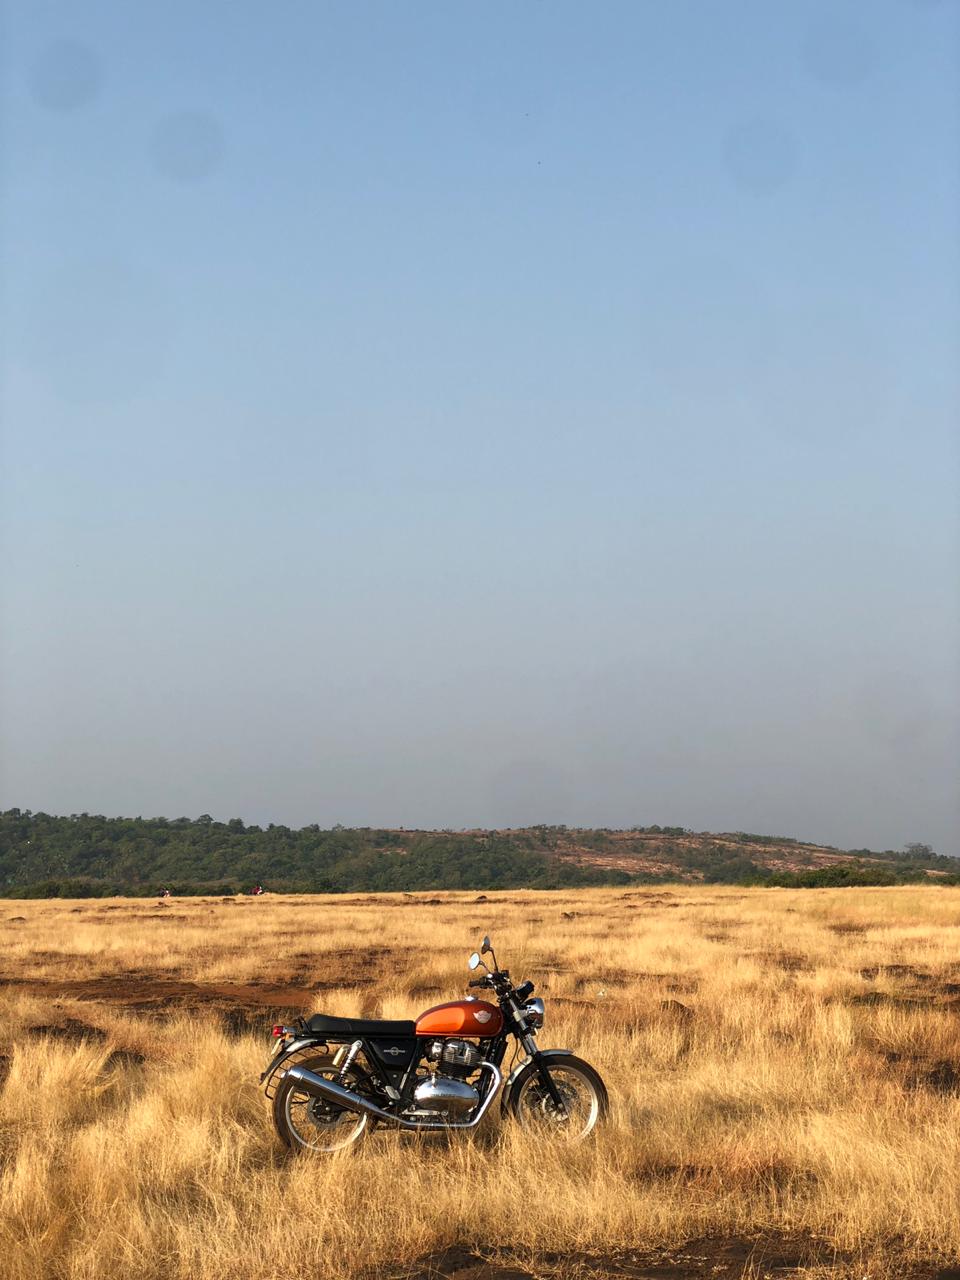 <p><a href="http://overdrive.in/news/royal-enfield-interceptor-650-launched-in-india-at-rs-2-34-lakh-continental-gt-650-at-rs-2-49-lakh/">We had received information that the&nbsp;Interceptor 650 launched in India at Rs 2.34 lakh, Continental GT 650 at Rs 2.49 lakh.</a></p>

<p>Stay tuned to know if these are the final prices</p>